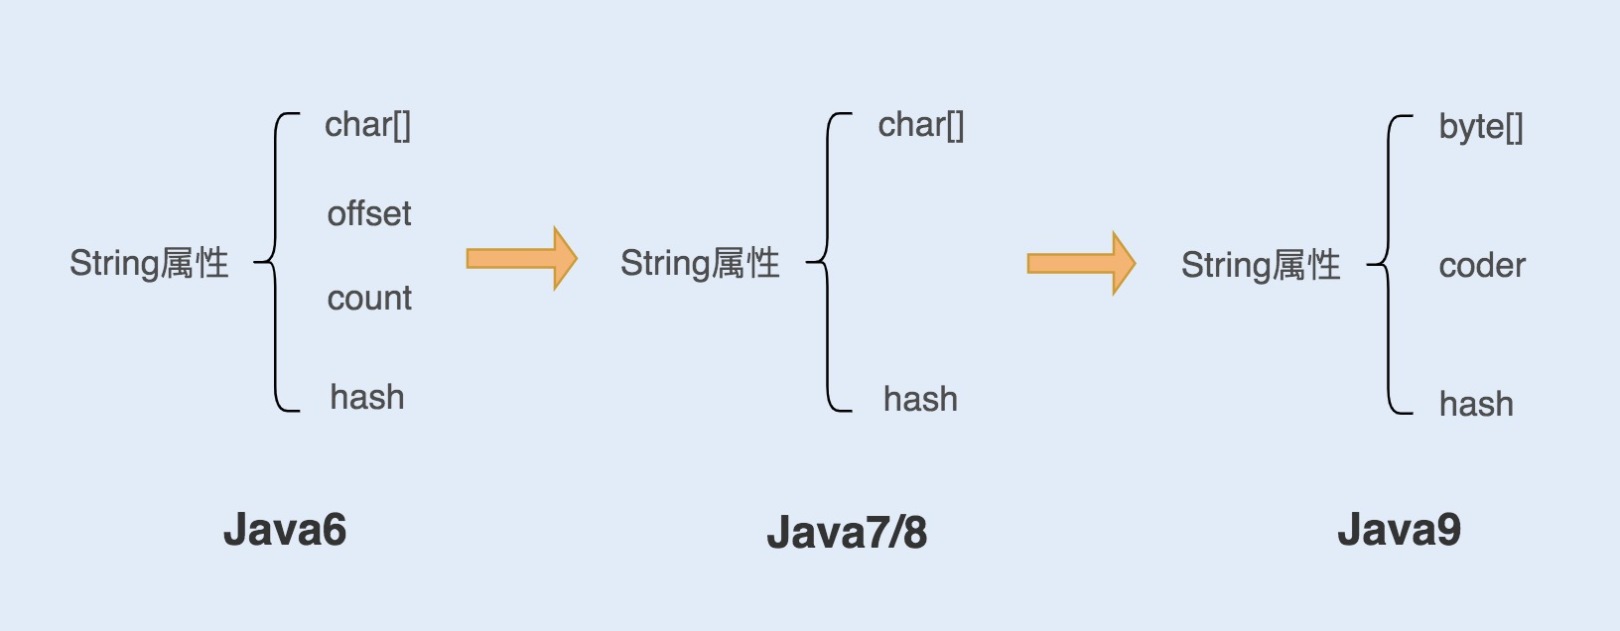 history_of_String